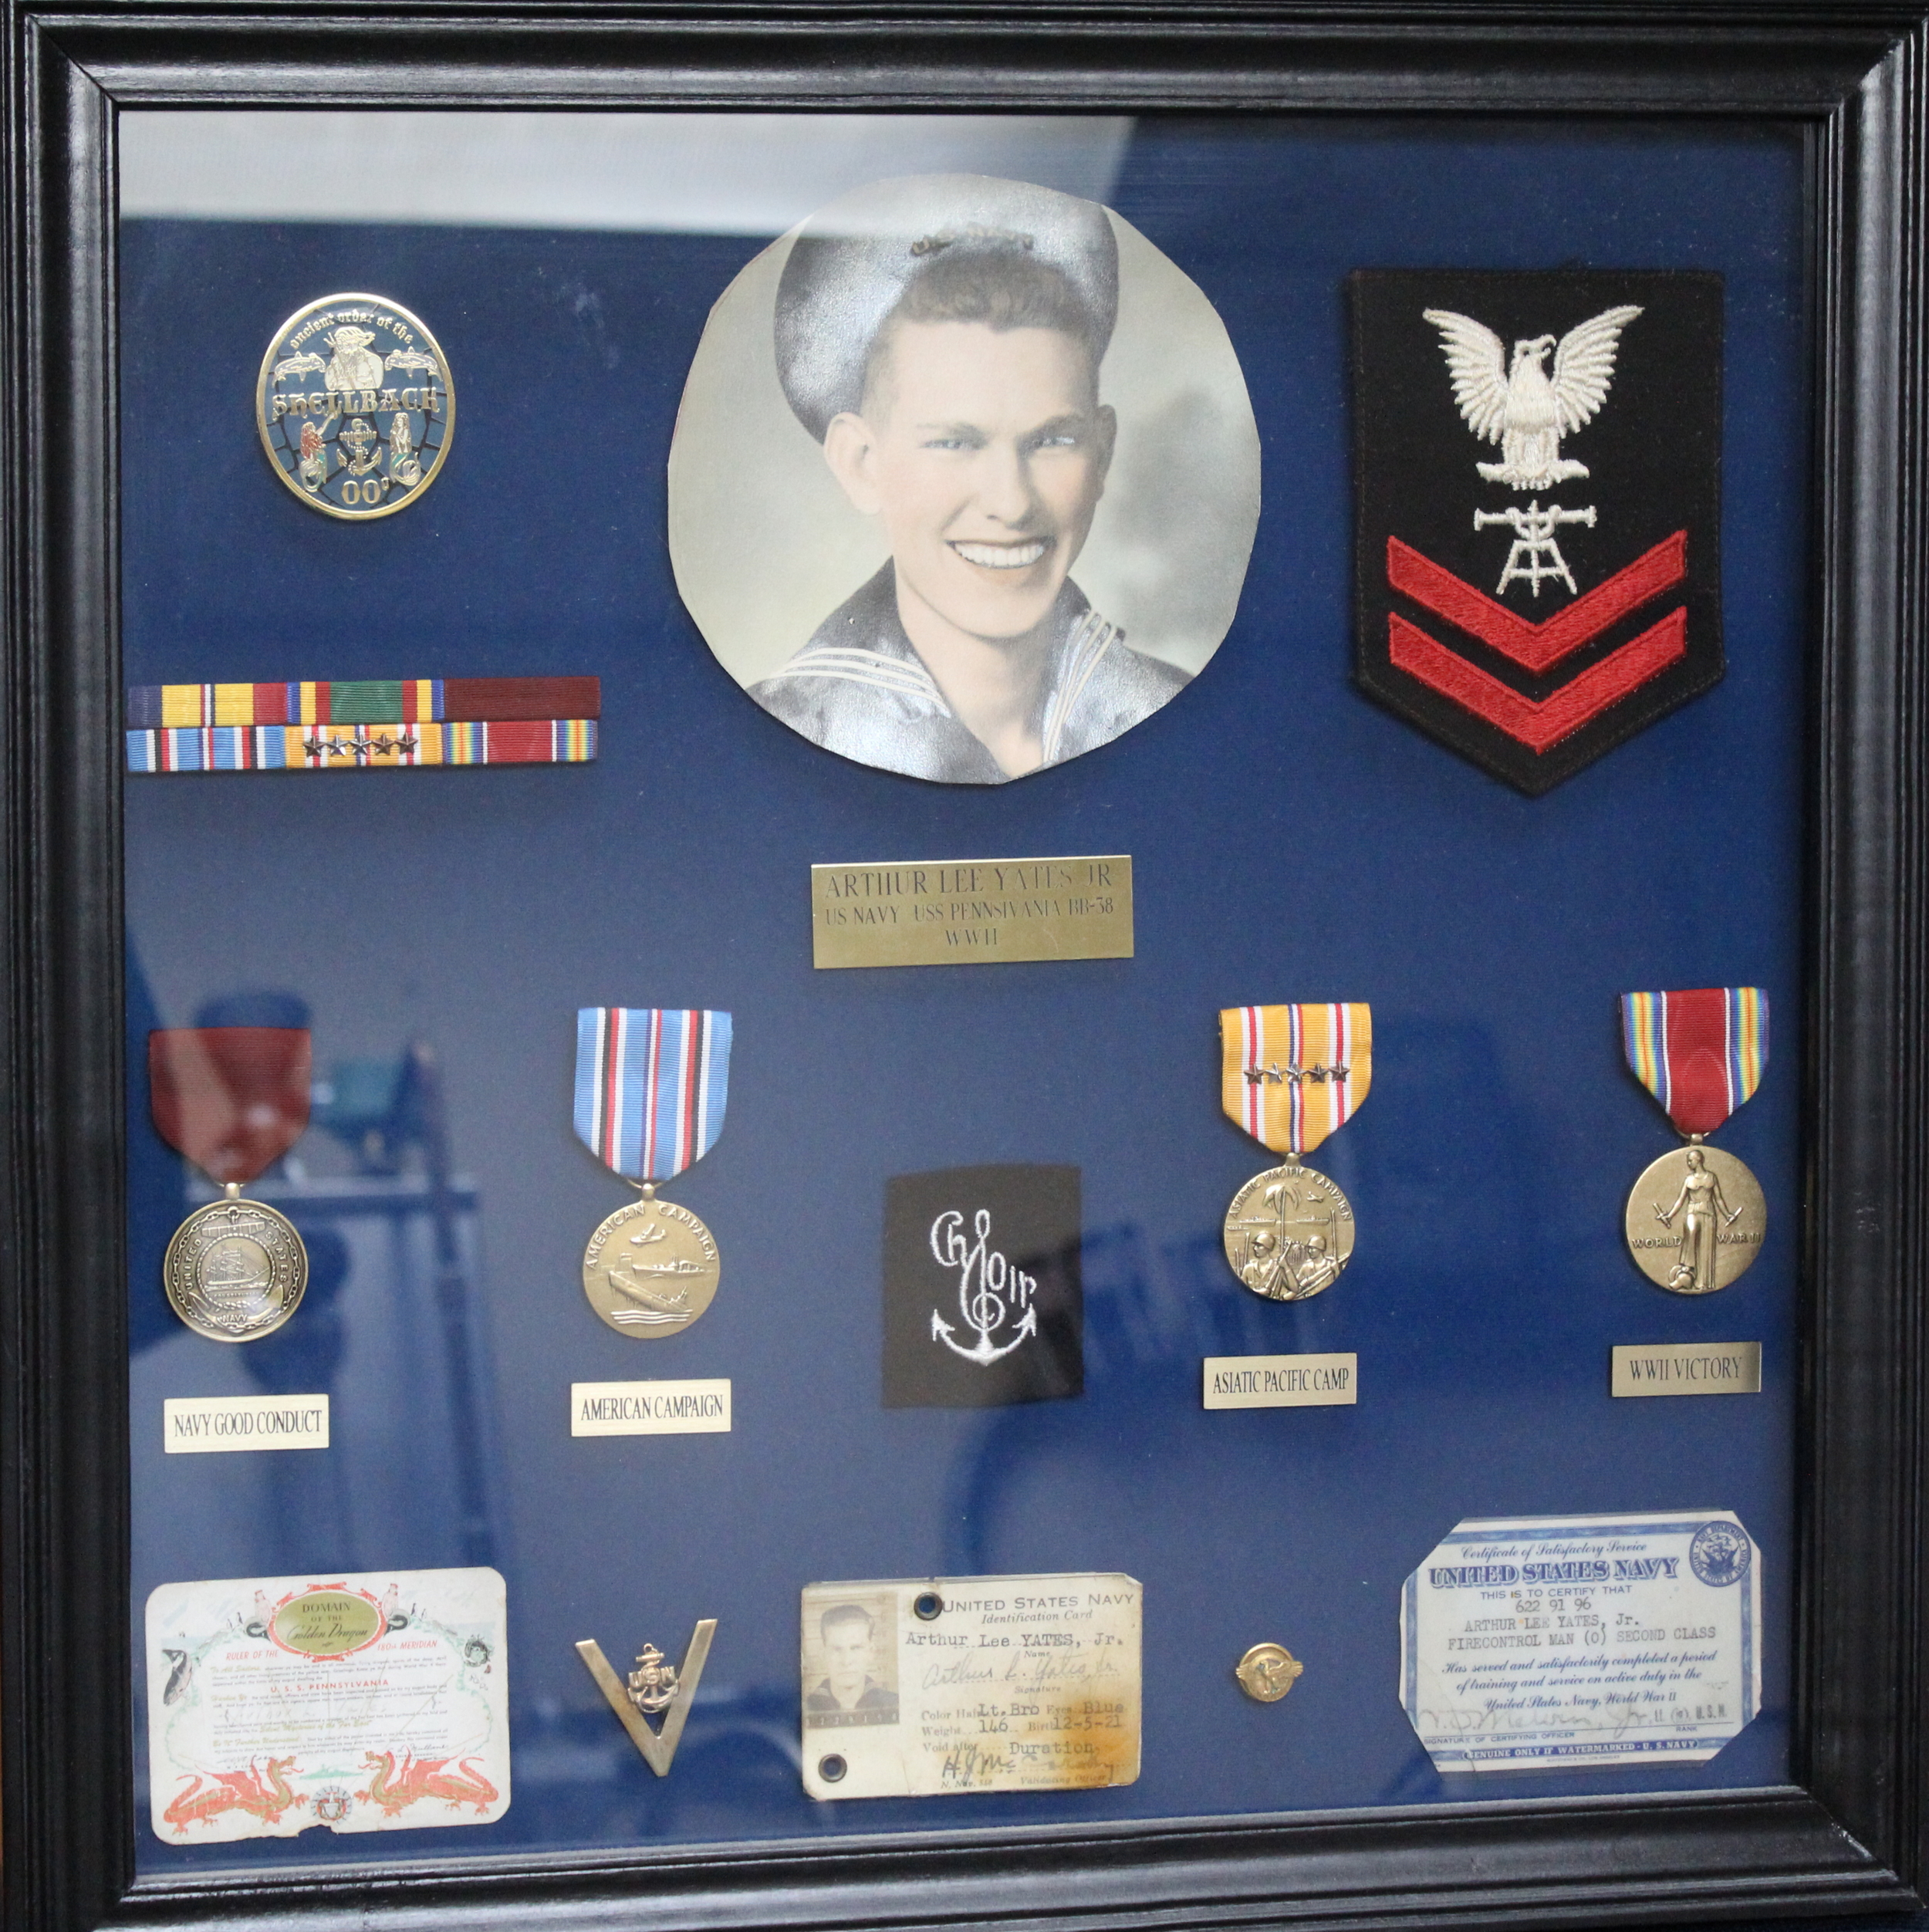 Most of Arthur's Awards and Accolades for World War II.